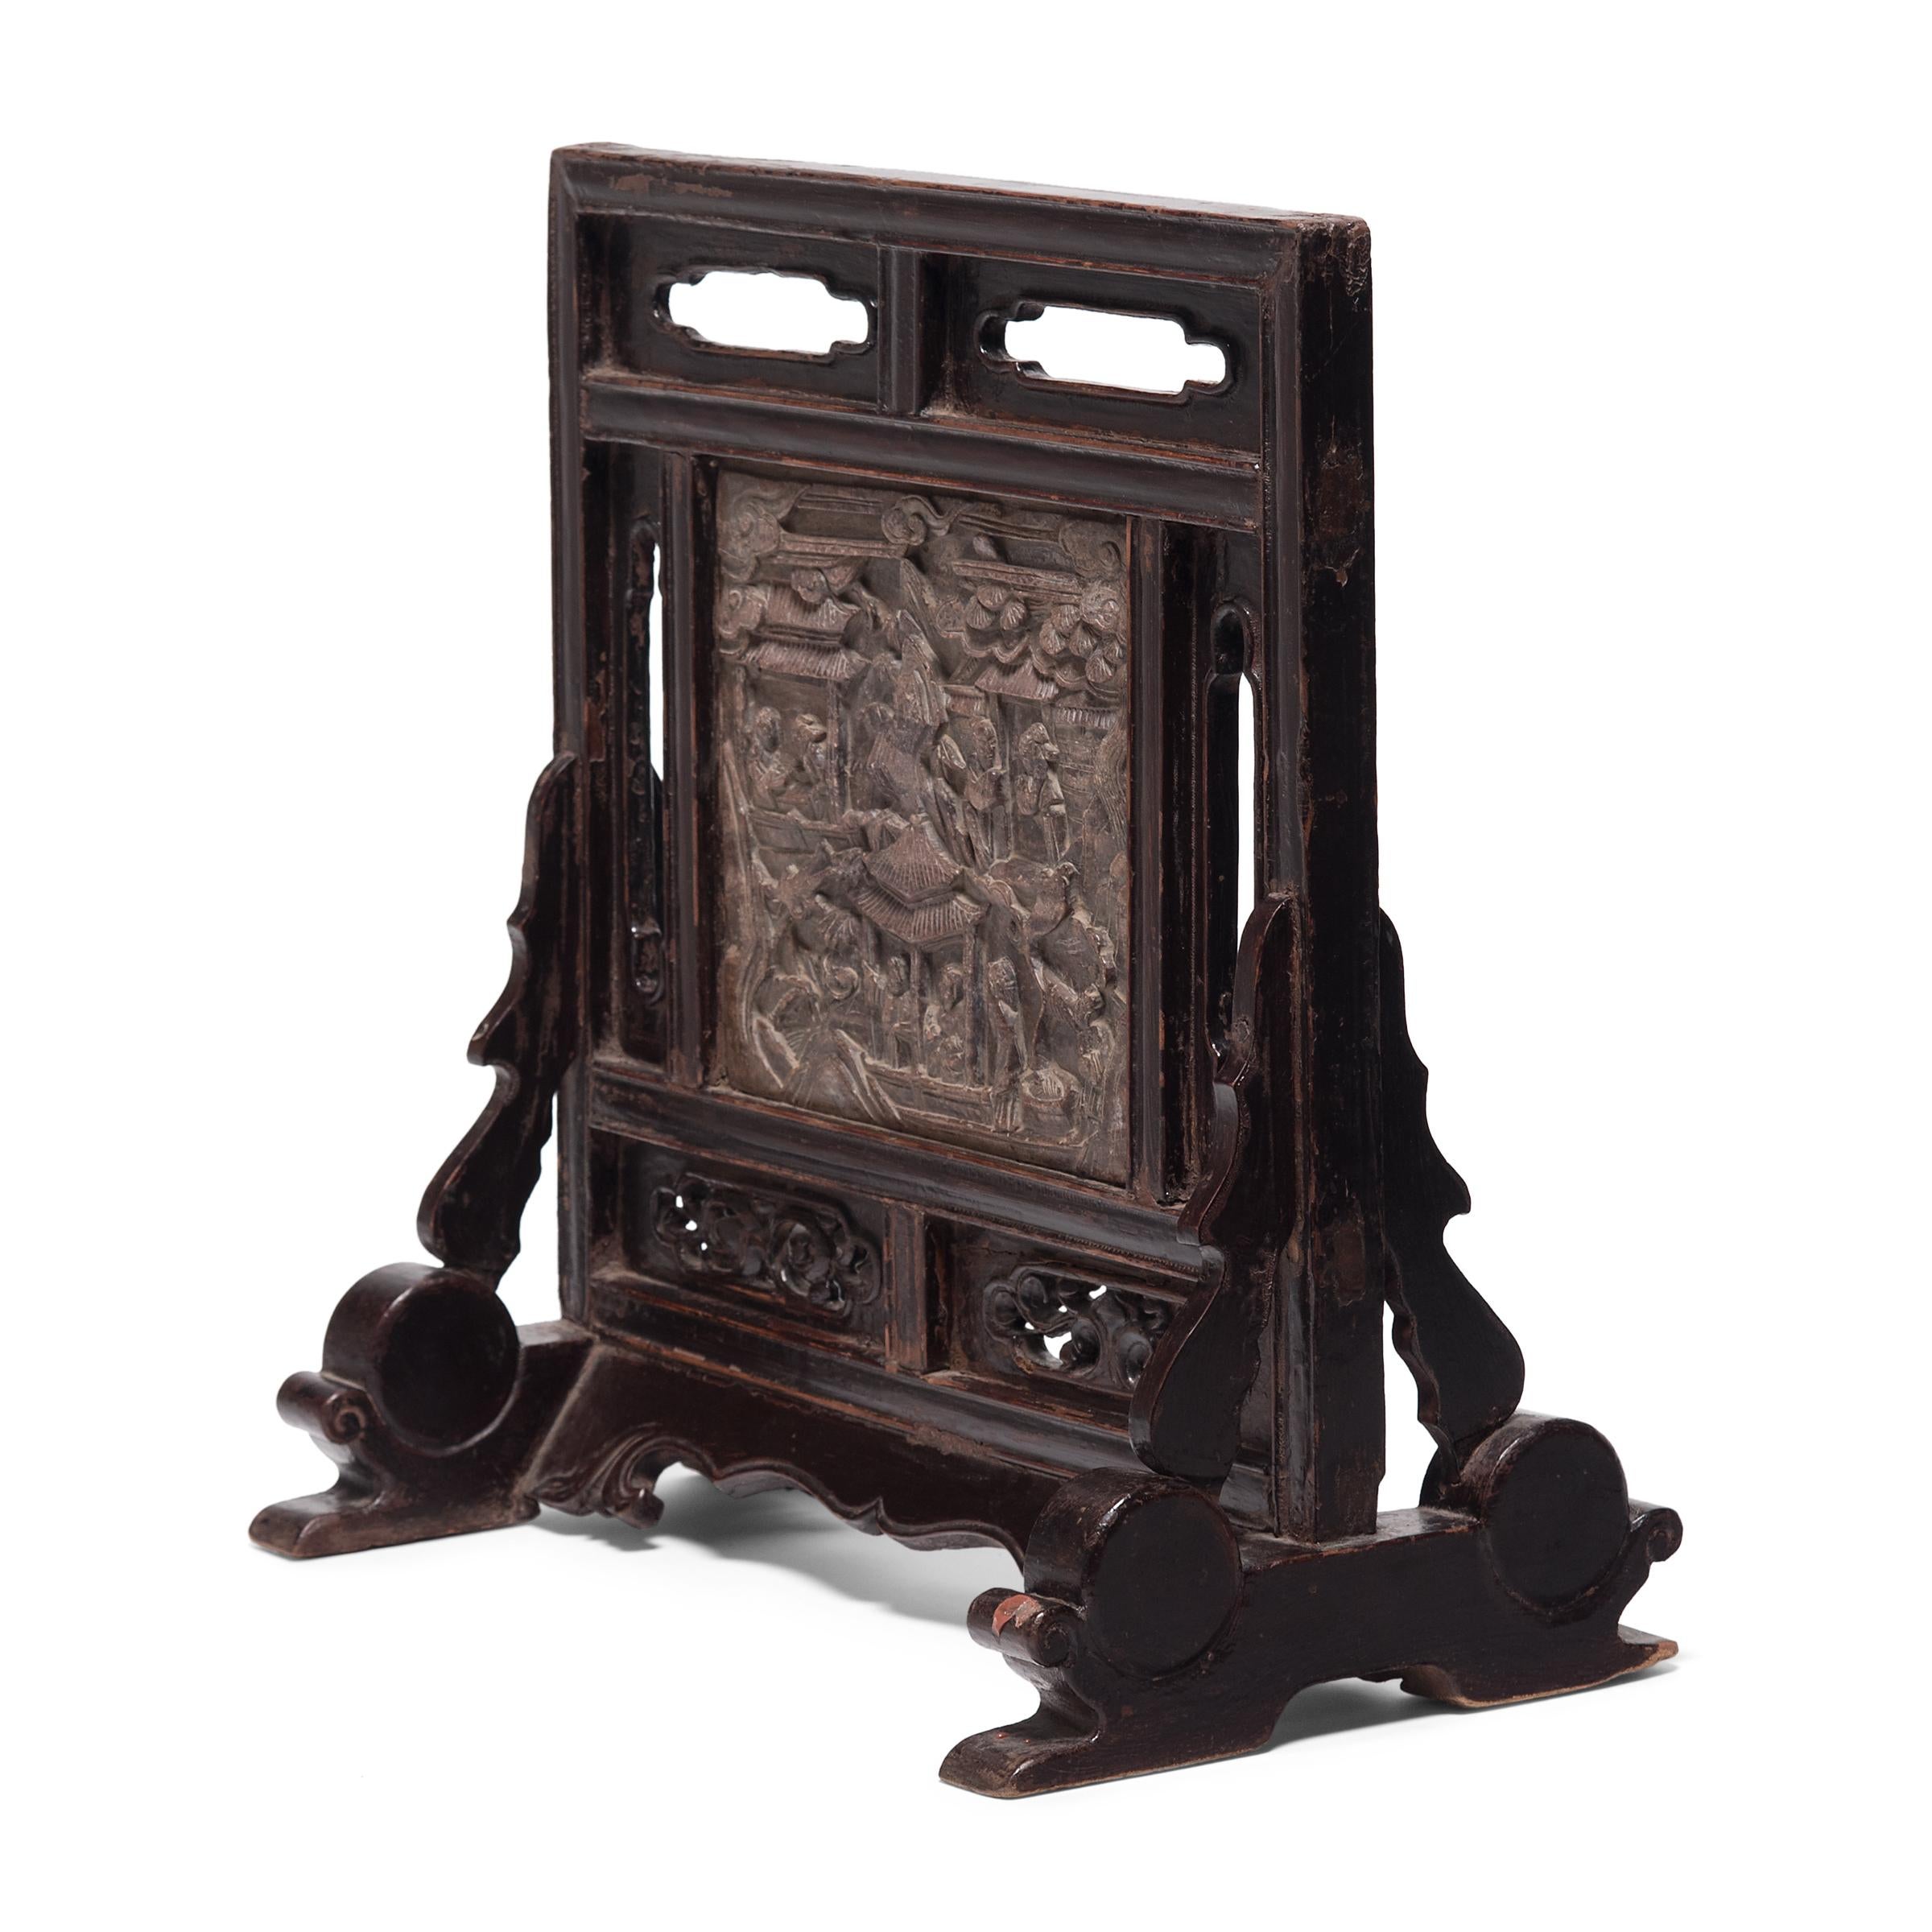 Prevalent in fine Chinese interiors as early as the Tang dynasty (618-906), standing screens with decorative stone panels served numerous functions as portable architecture. Used to section off a room or as a backdrop to a throne or floral